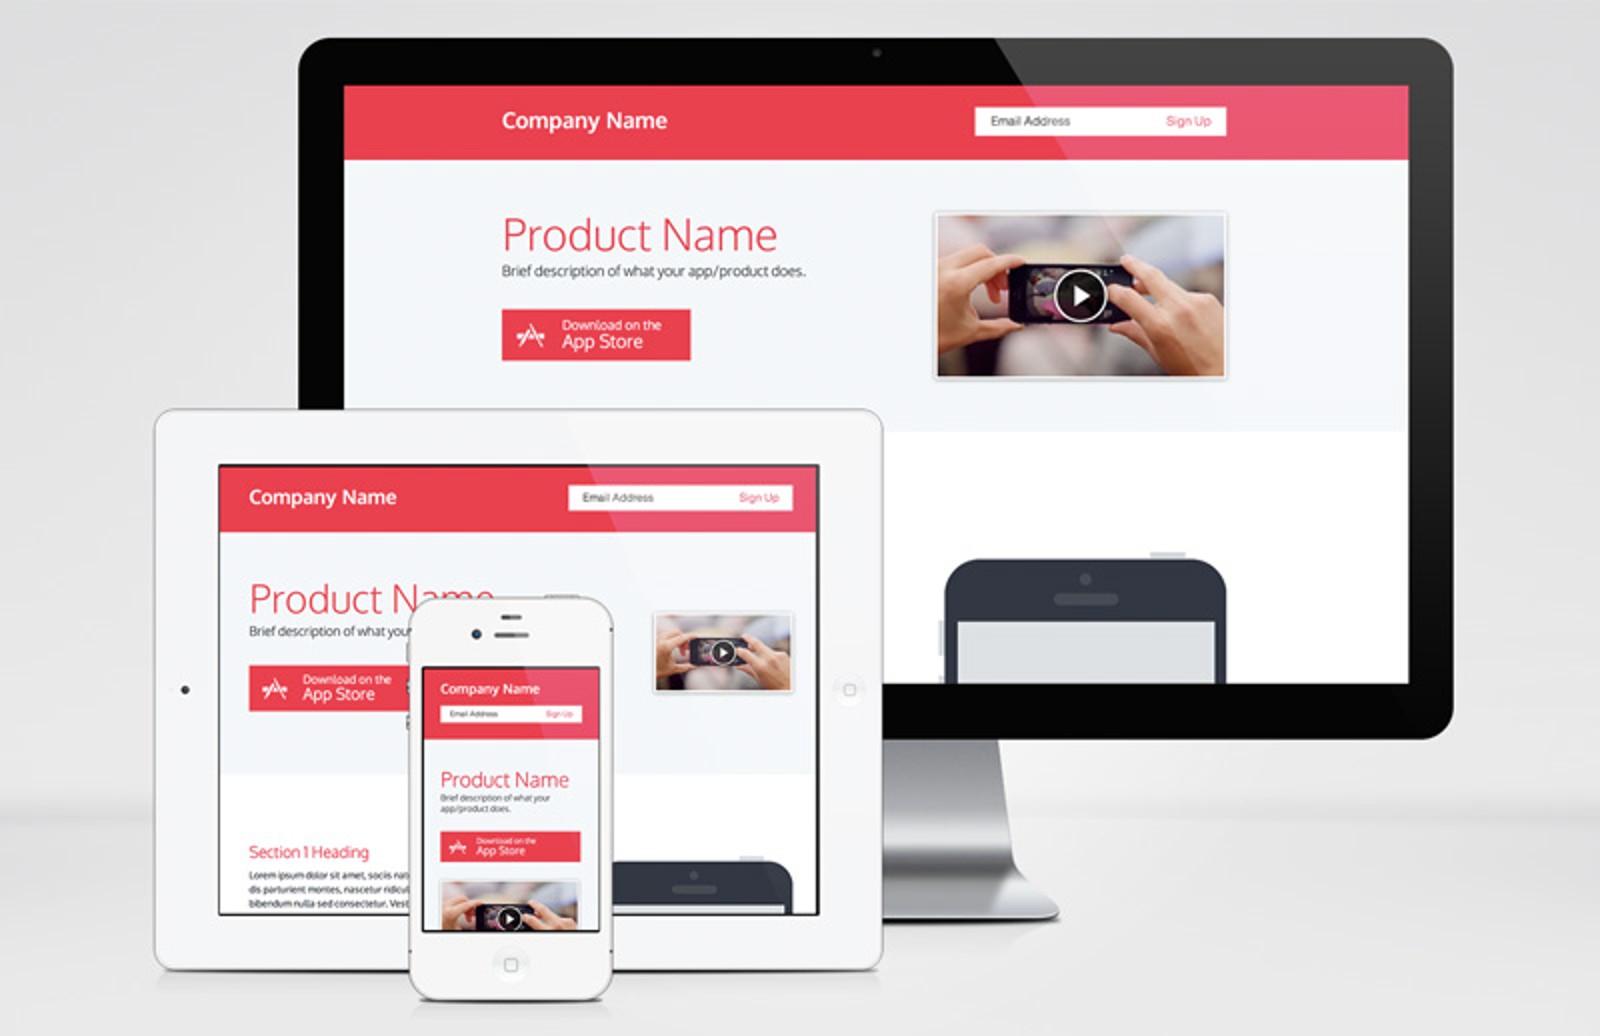 Revise default single product page · Issue #373 